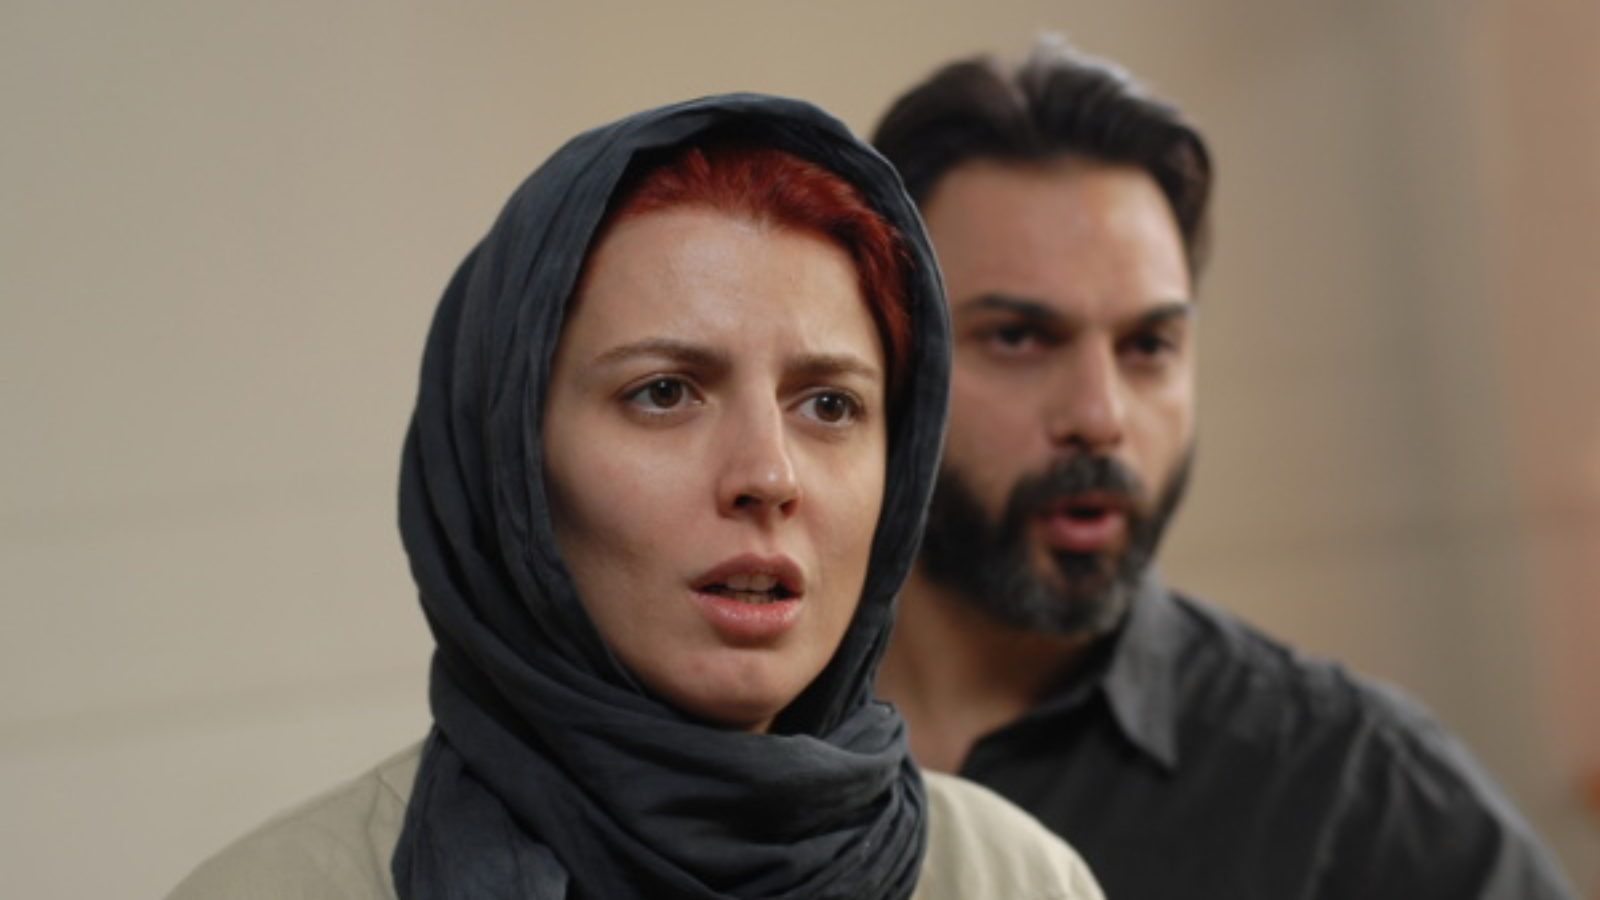 Woman in hijab stands in front of man; she looks concerned.